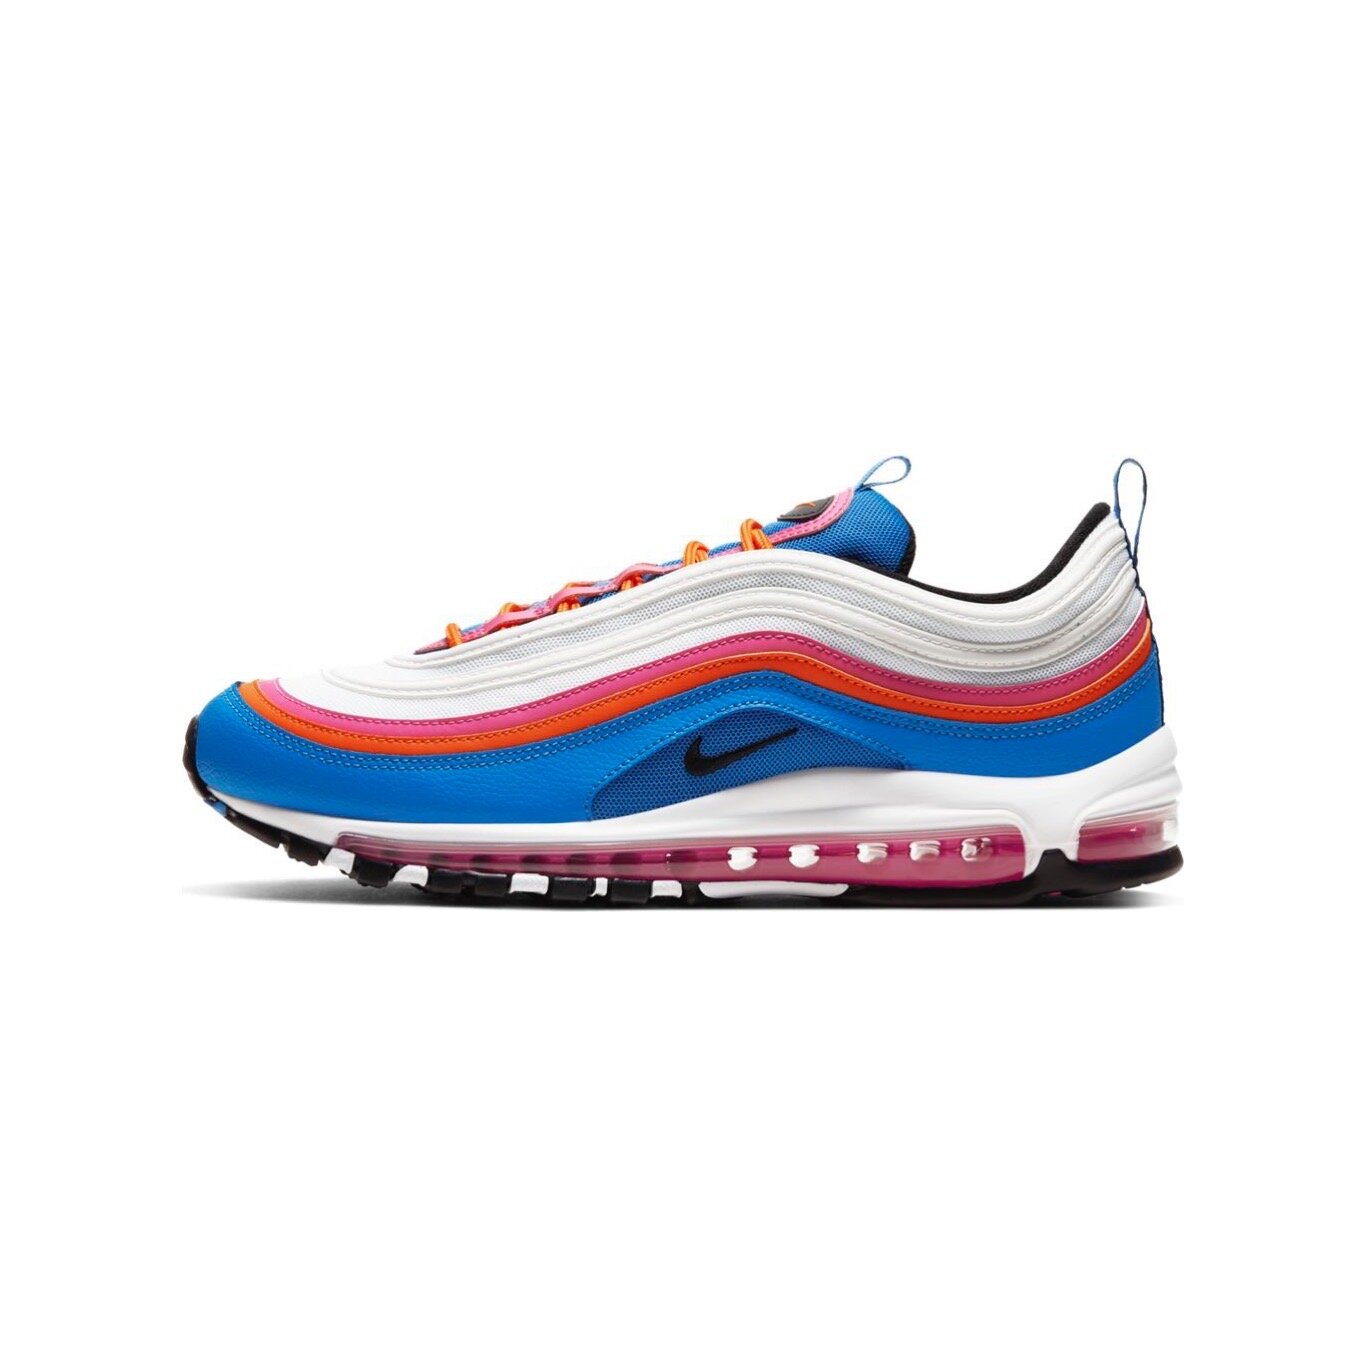 Nike Air Max 97 in White/Black/Active 